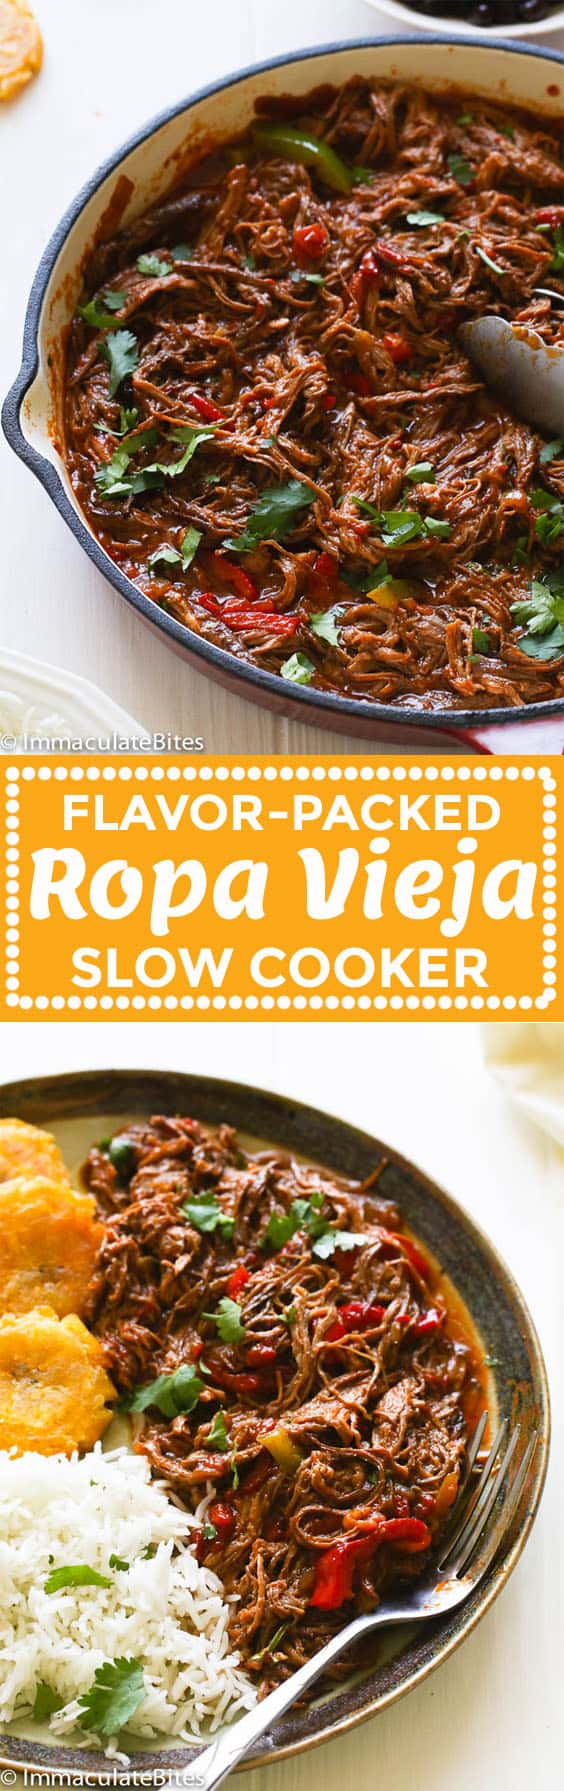 ropa vieja slow cooker